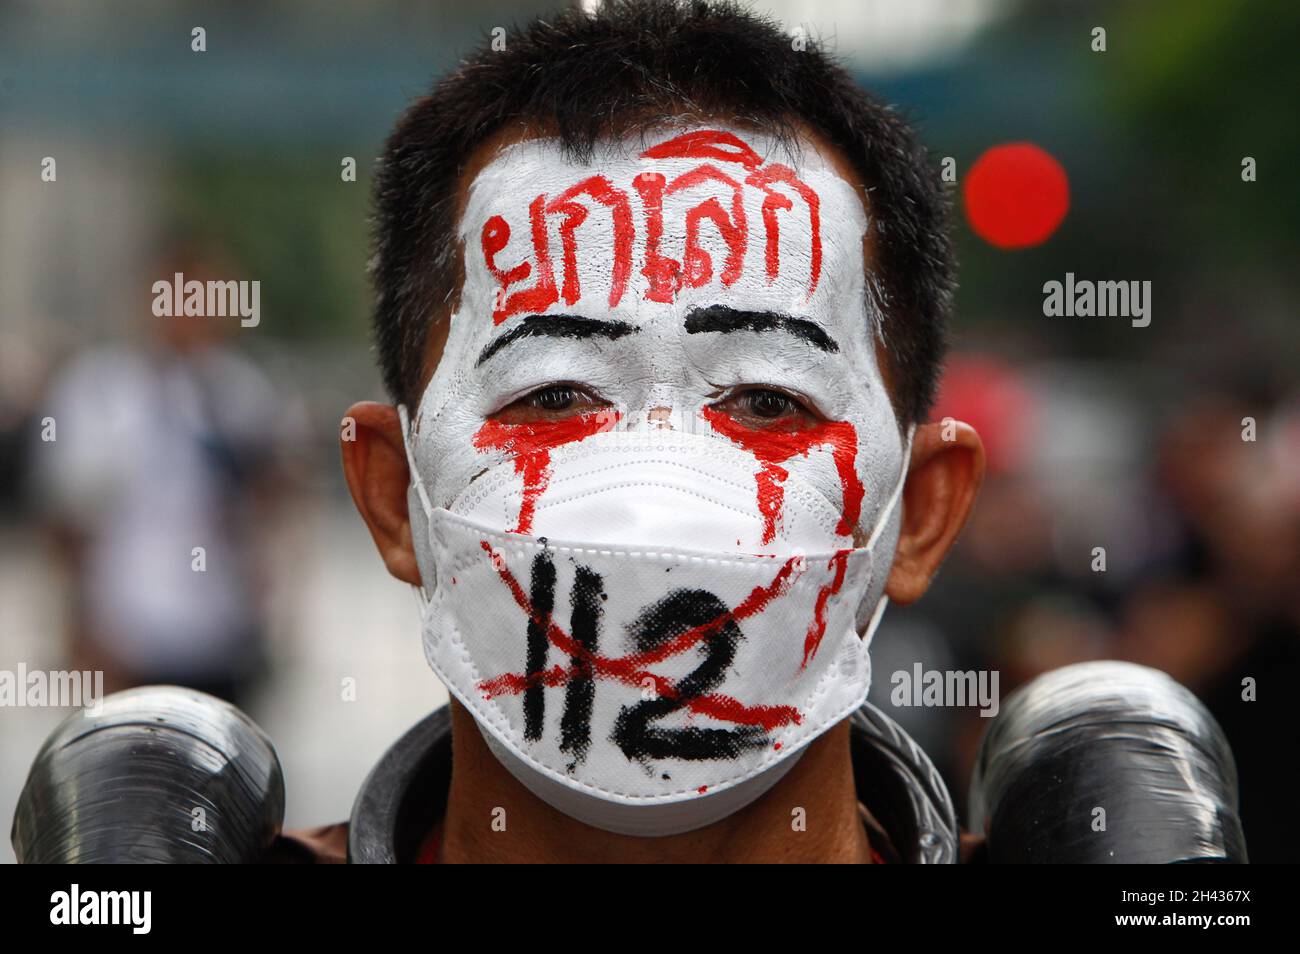 Bangkok, Thailand. 31st Oct, 2021. A protester wearing face paint during the demonstration. Anti-government protesters gathered at Ratchaprasong intersection in Bangkok demanding Prime Minister Prayuth Chan-ocha's resignation and the abolition of the 112 Lese-Majeste law. (Photo by Chaiwat Subprasom/SOPA Images/Sipa USA) Credit: Sipa USA/Alamy Live News Stock Photo